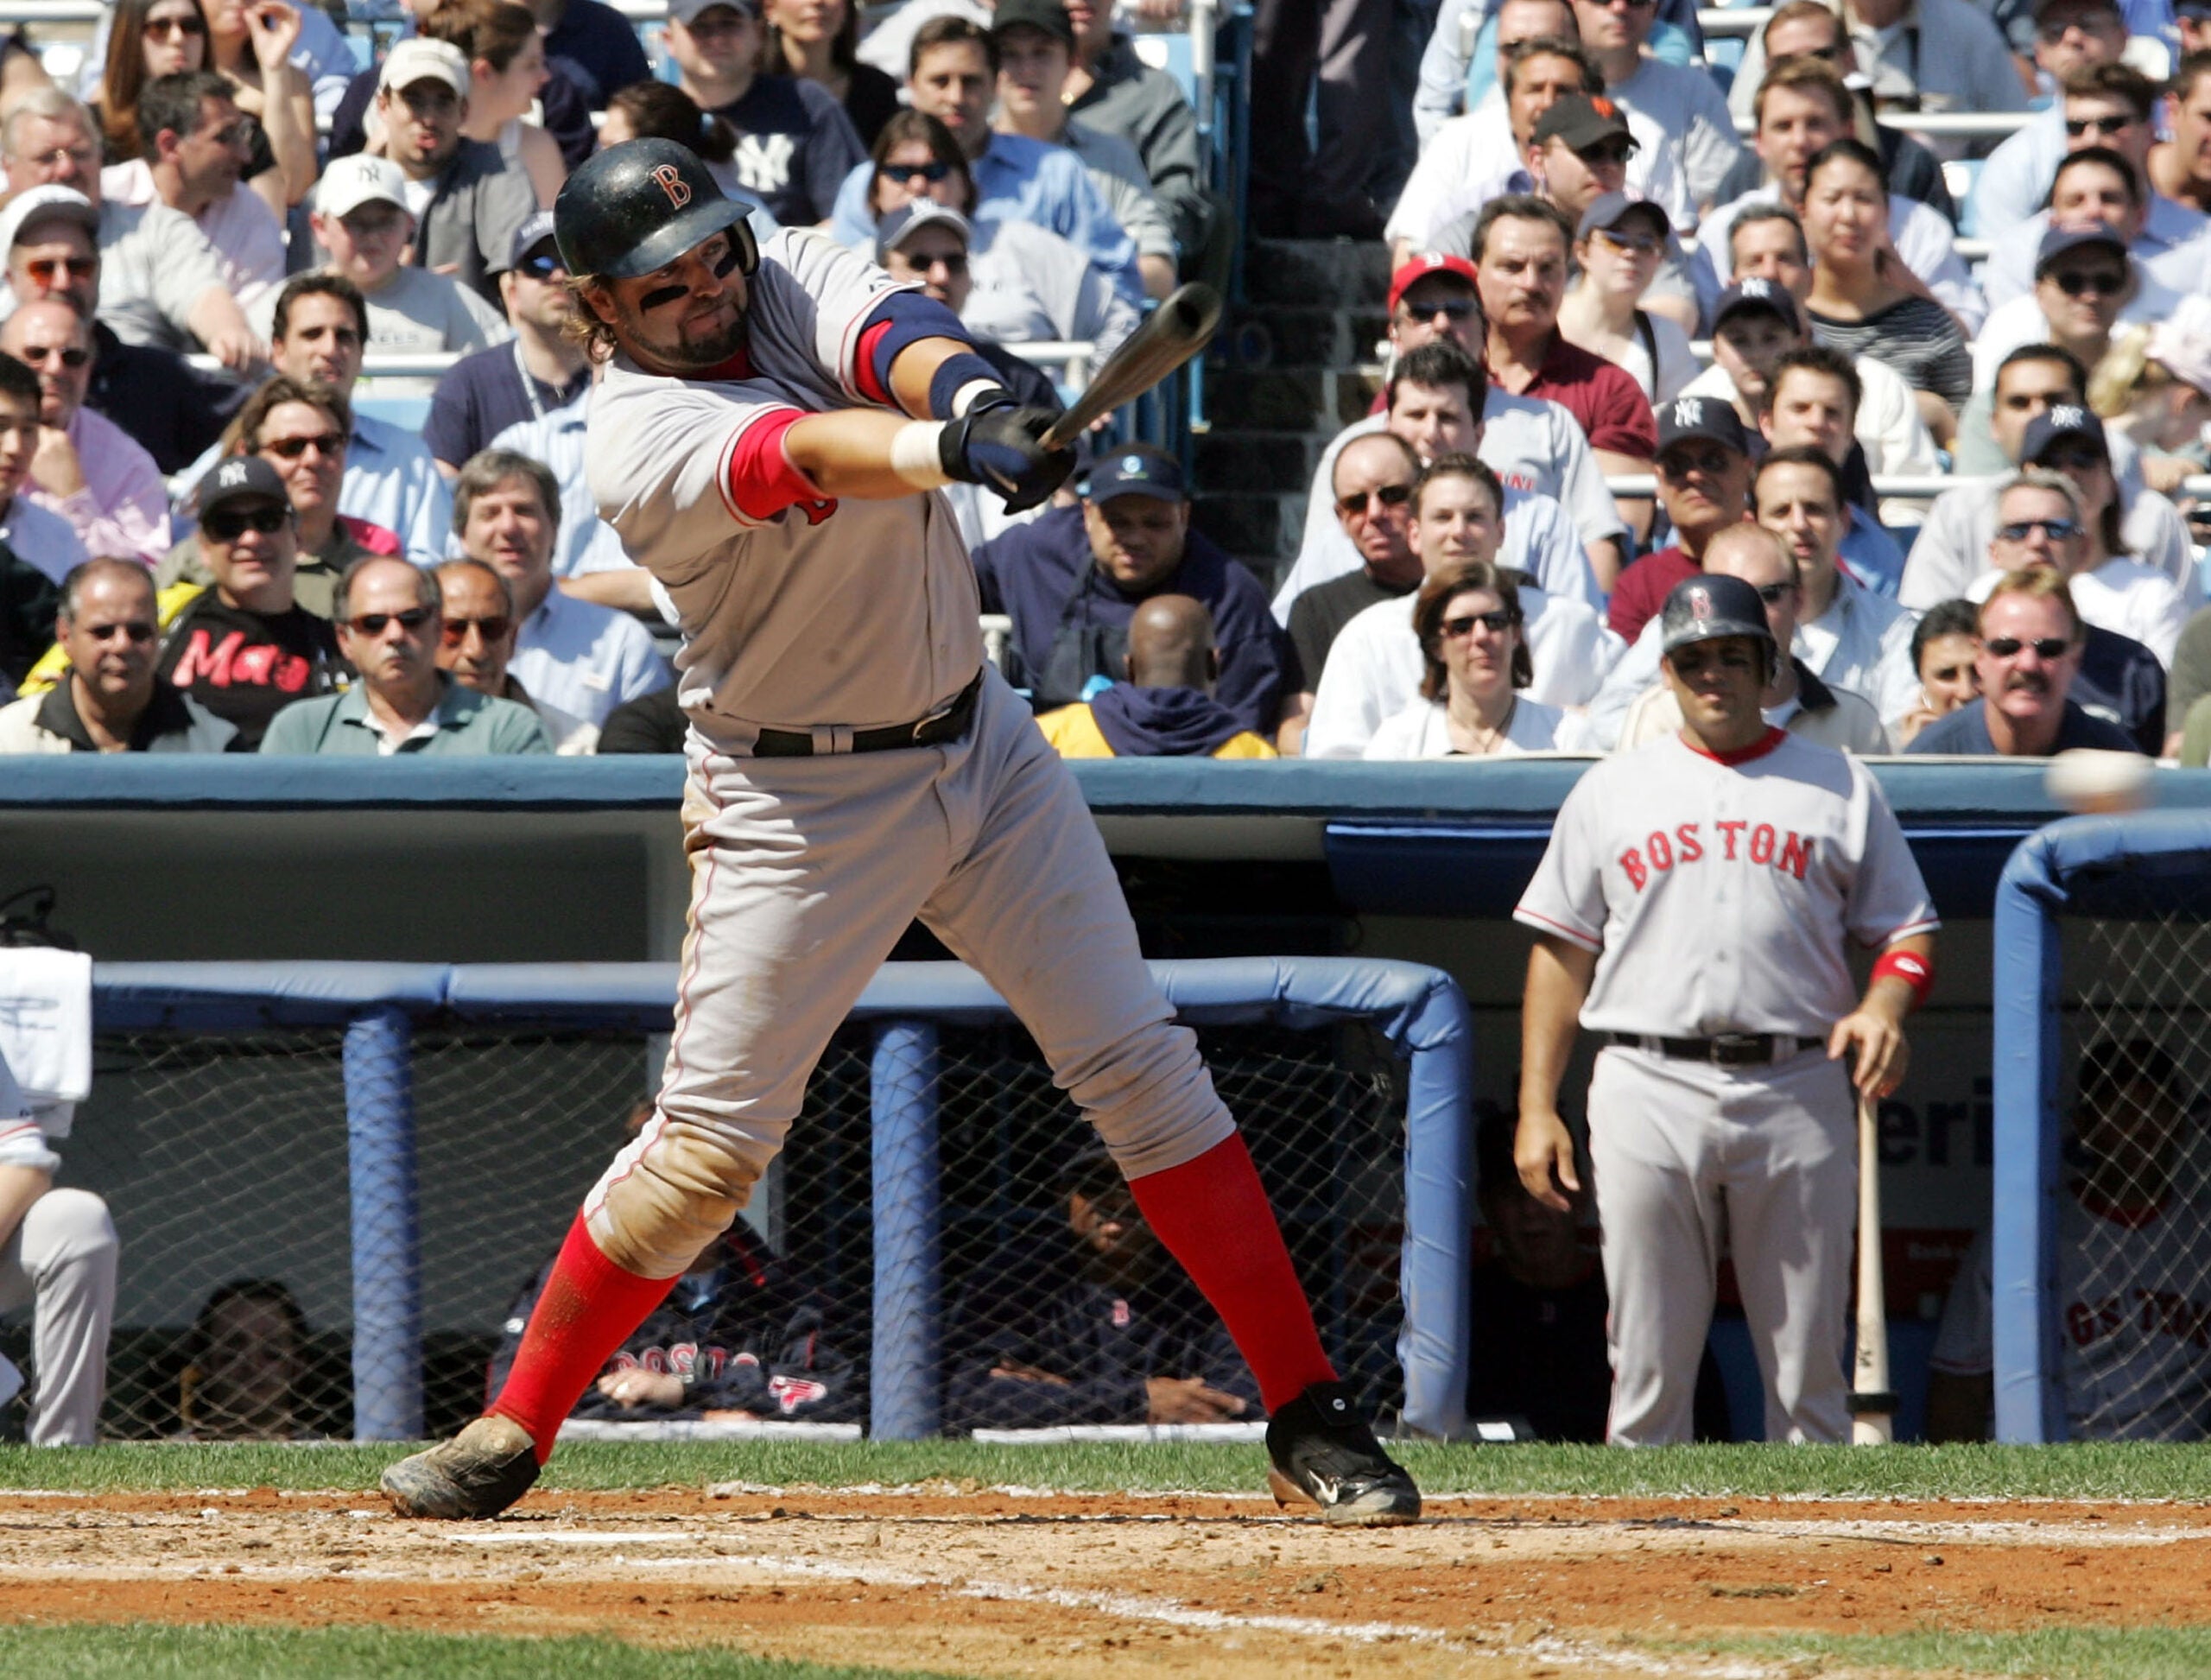 Kevin Millar on his odd path to Boston and the Red Sox' playoff